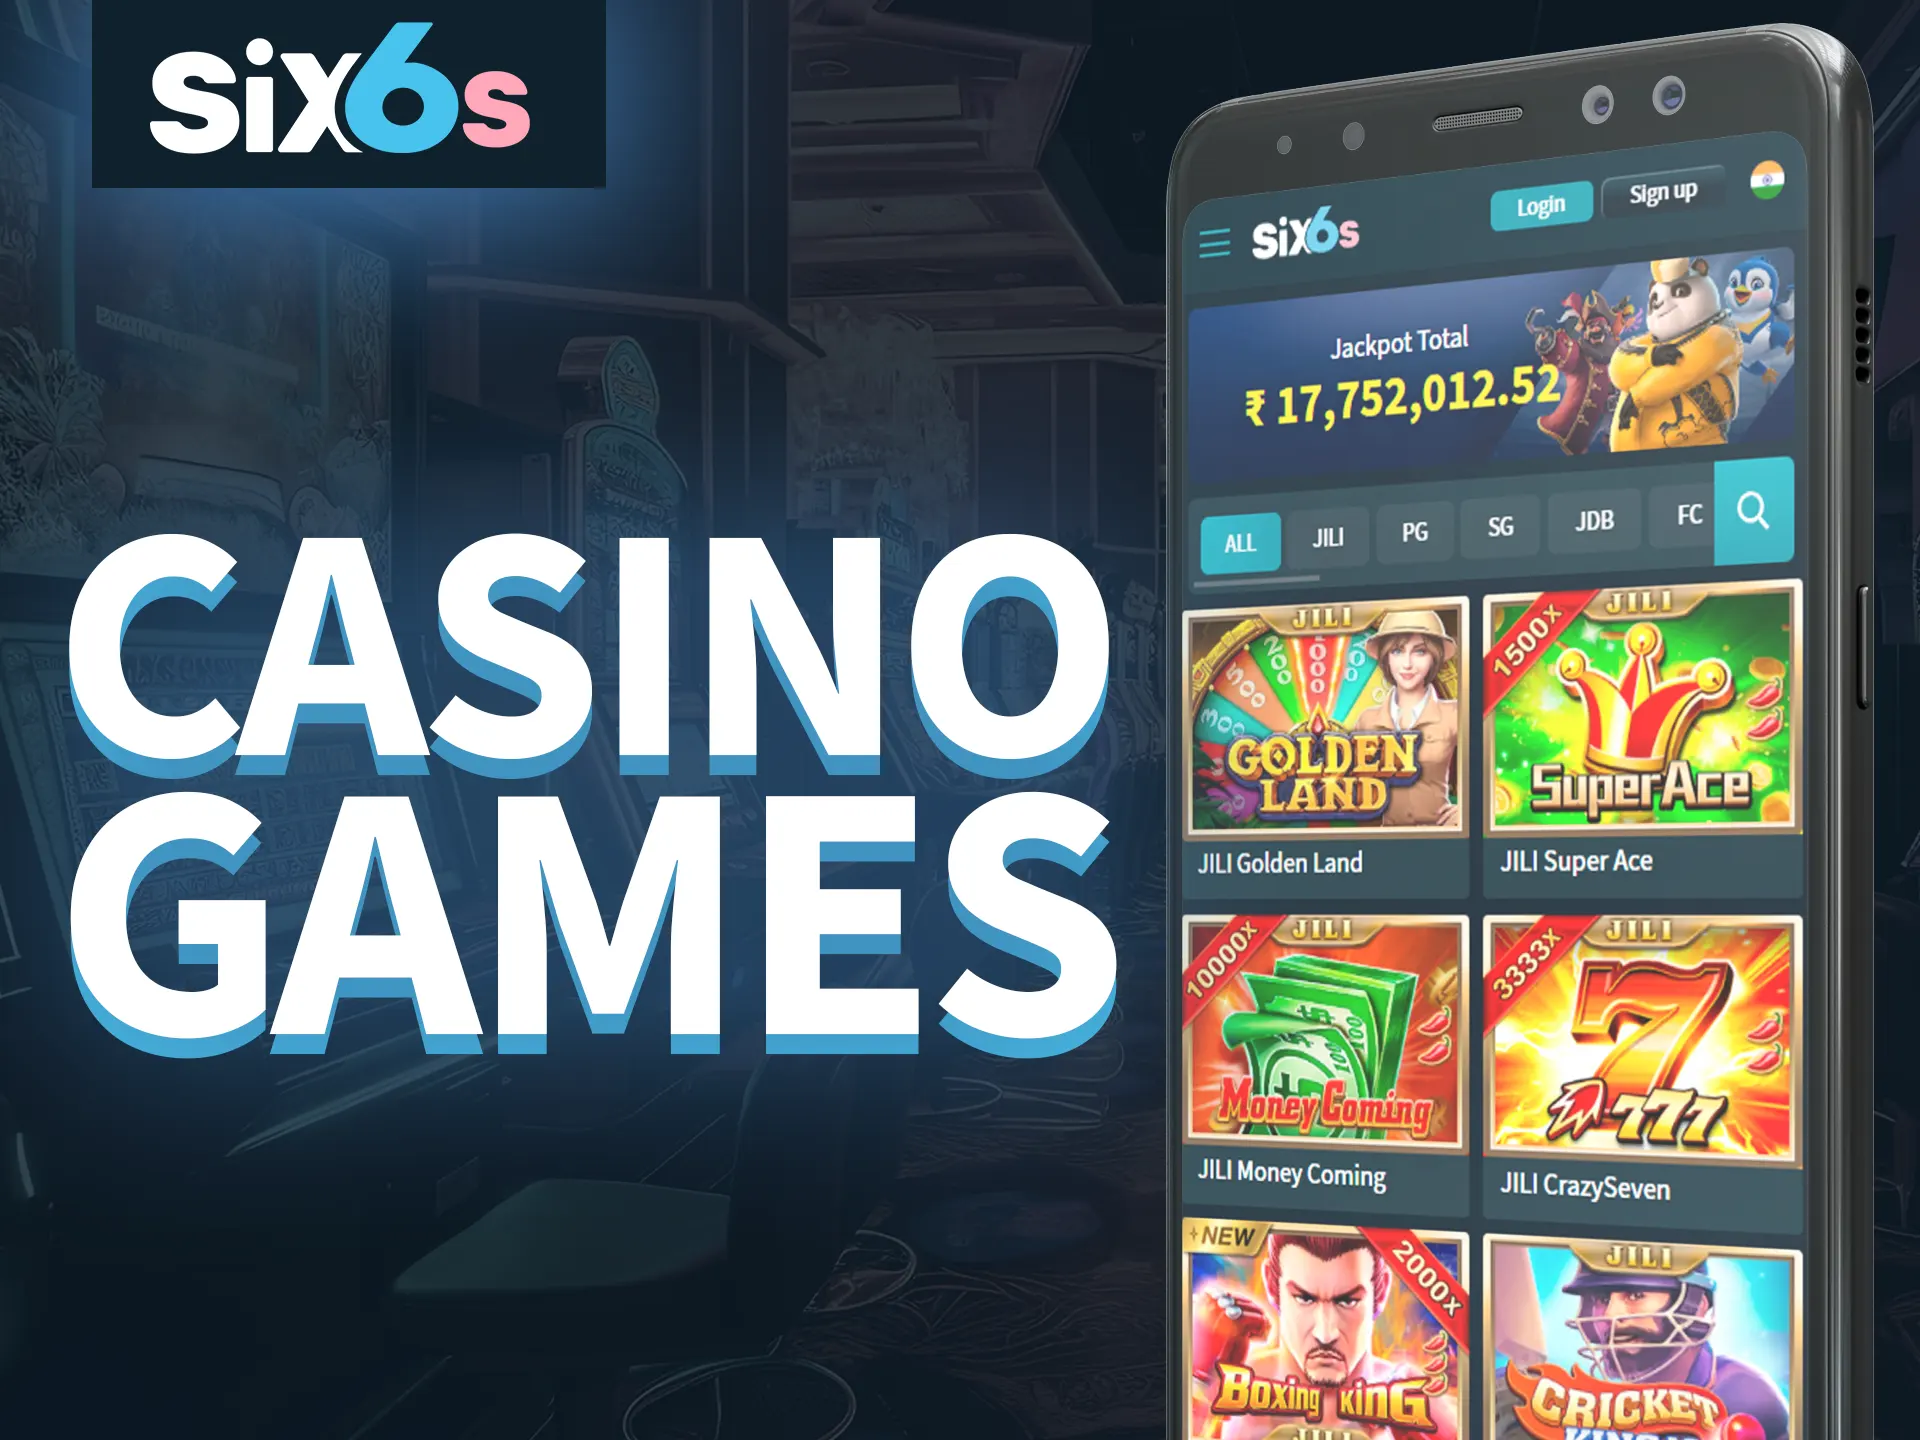 Play any casino games on Six6s.